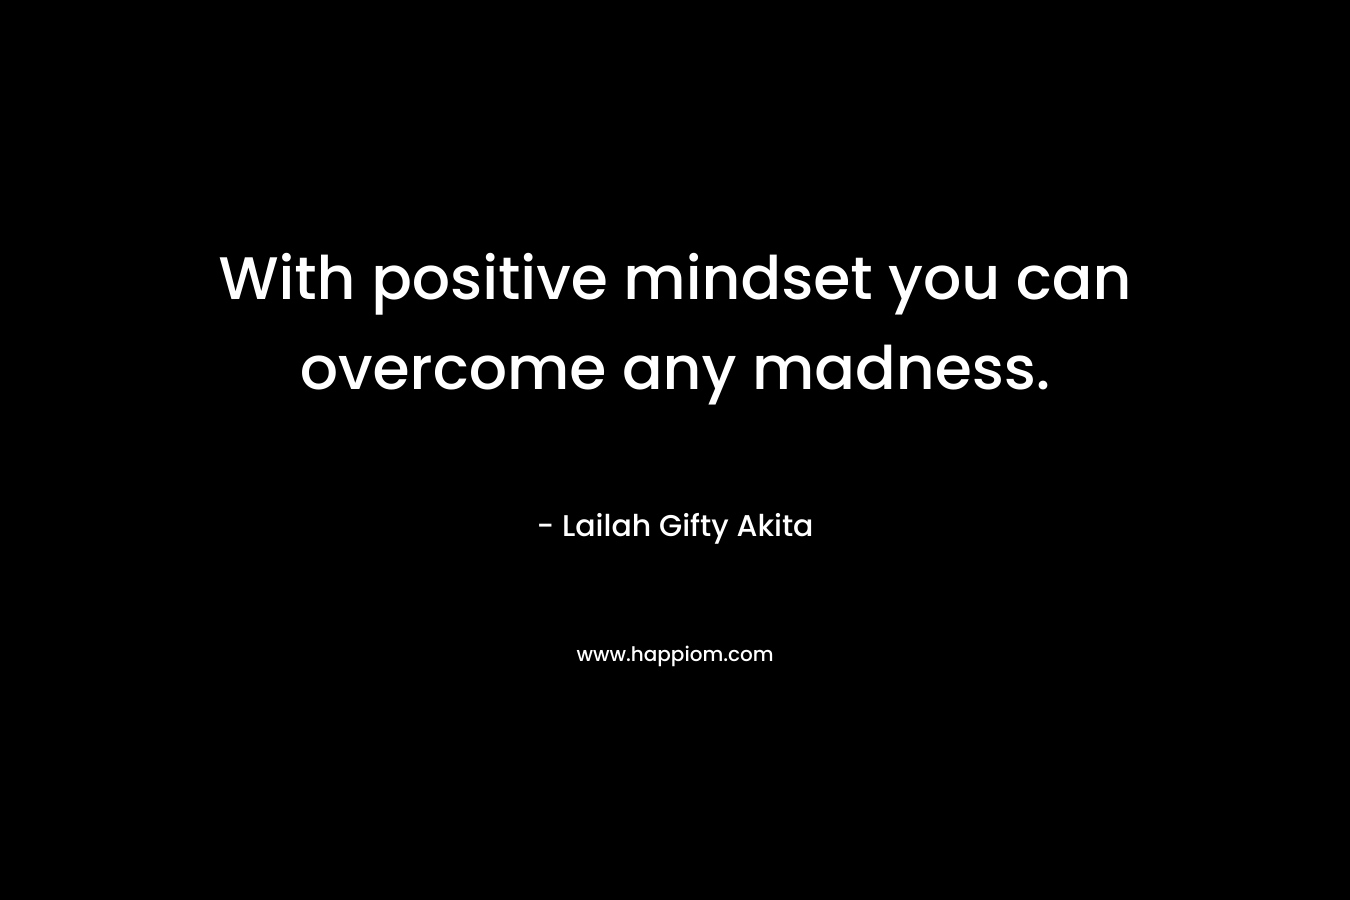 With positive mindset you can overcome any madness.